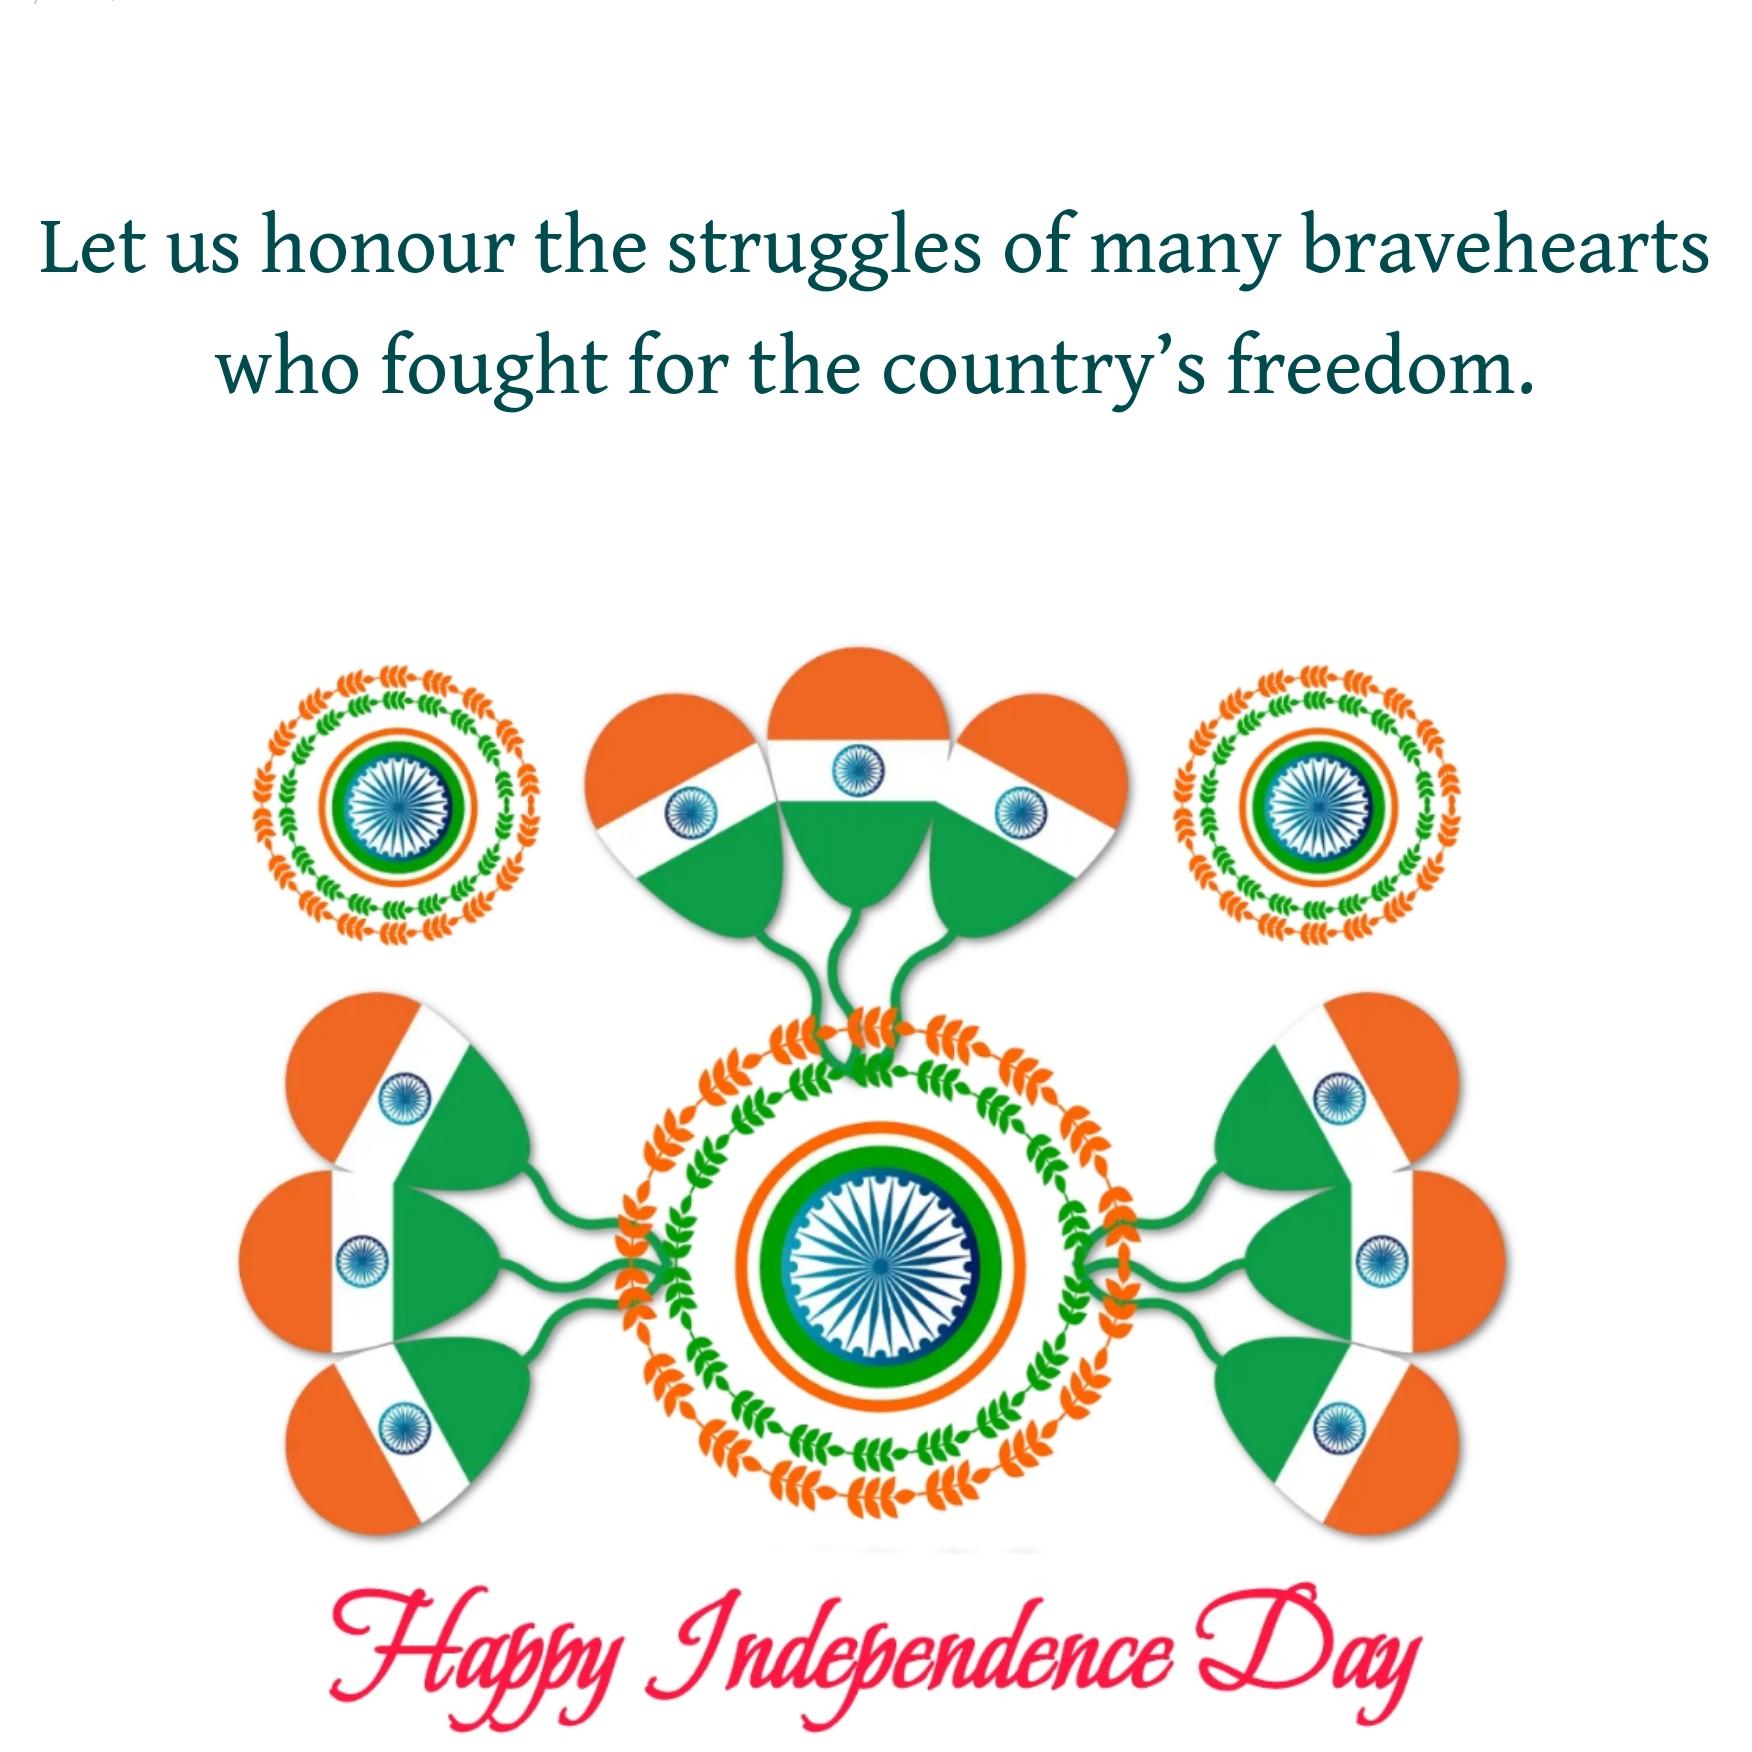 Let us honour the struggles of many bravehearts